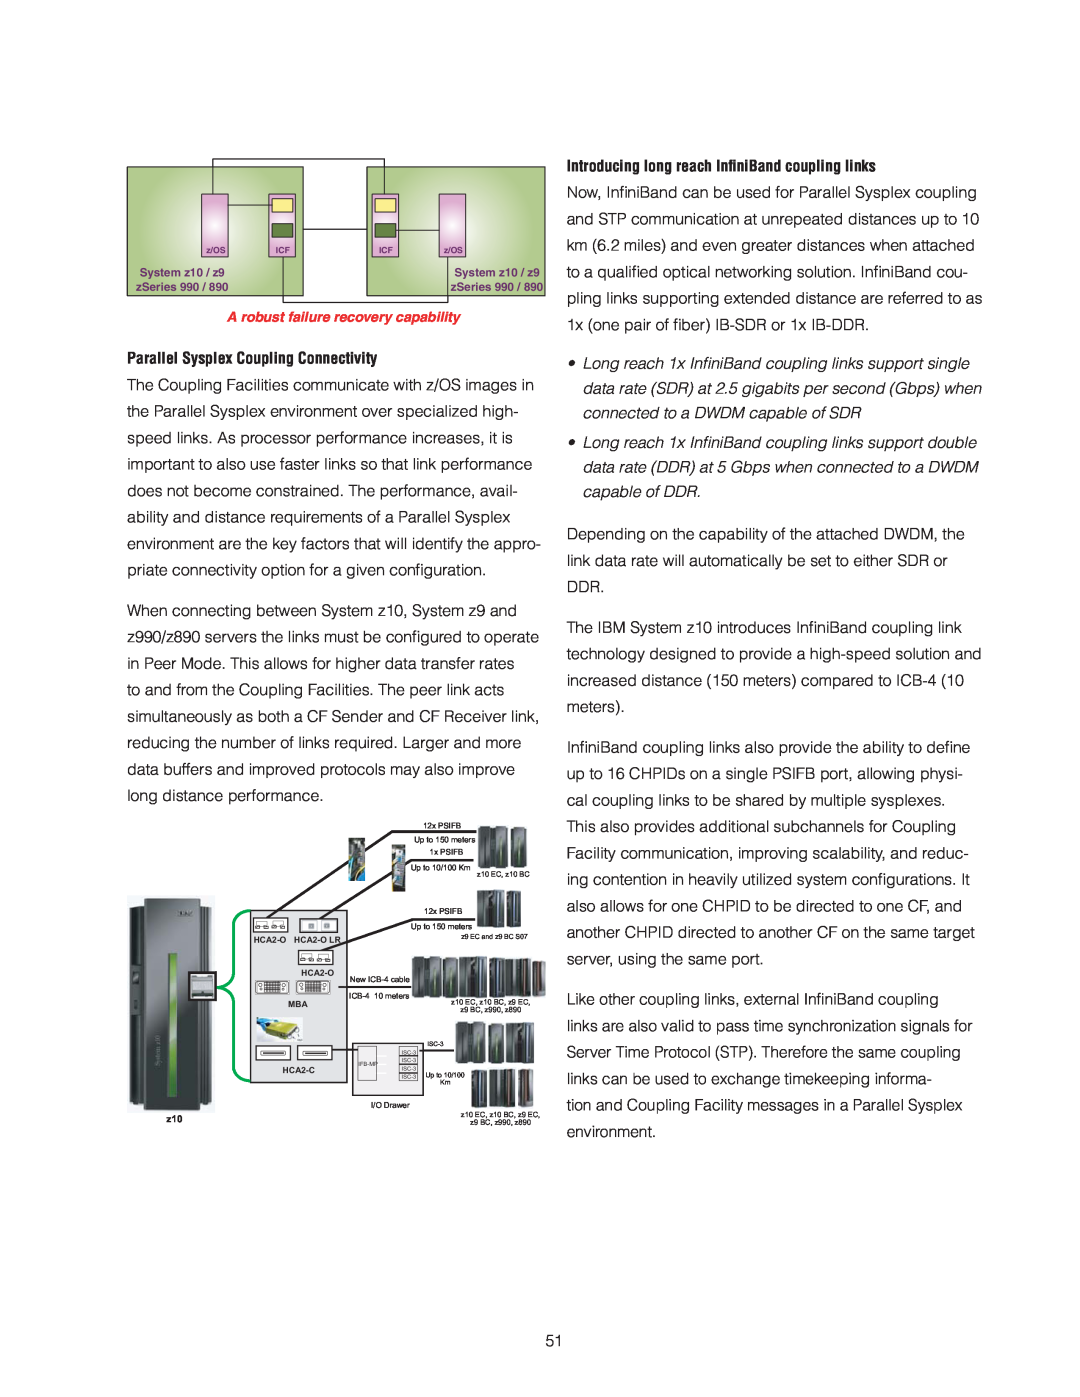 IBM Z10 BC manual Parallel Sysplex Coupling Connectivity, Introducing long reach InﬁniBand coupling links 